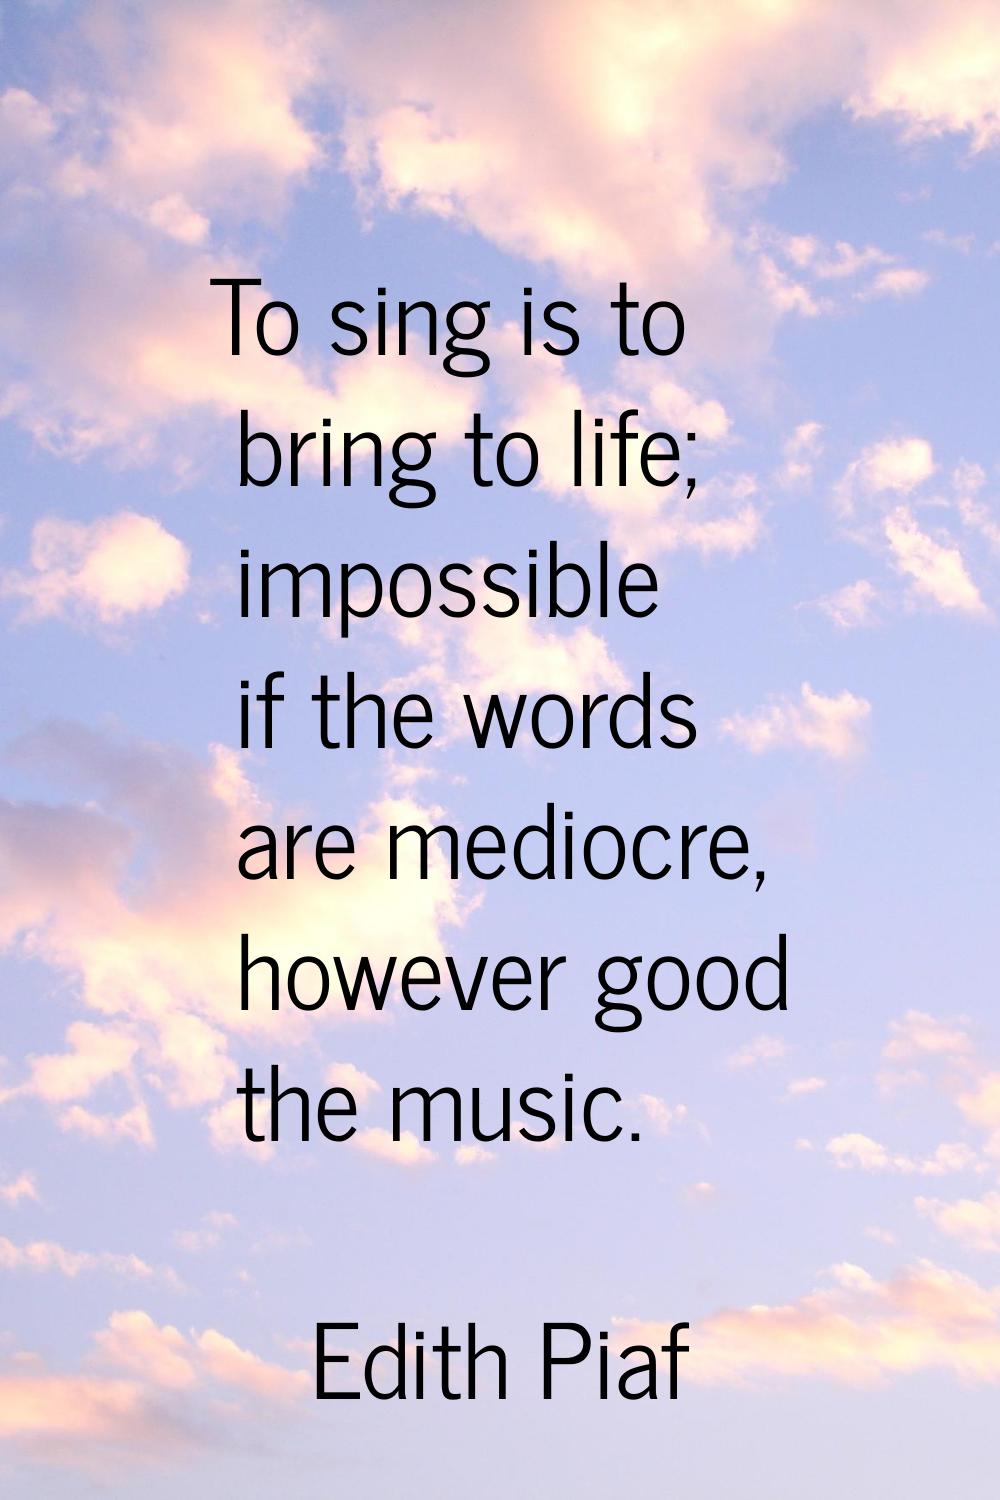 To sing is to bring to life; impossible if the words are mediocre, however good the music.